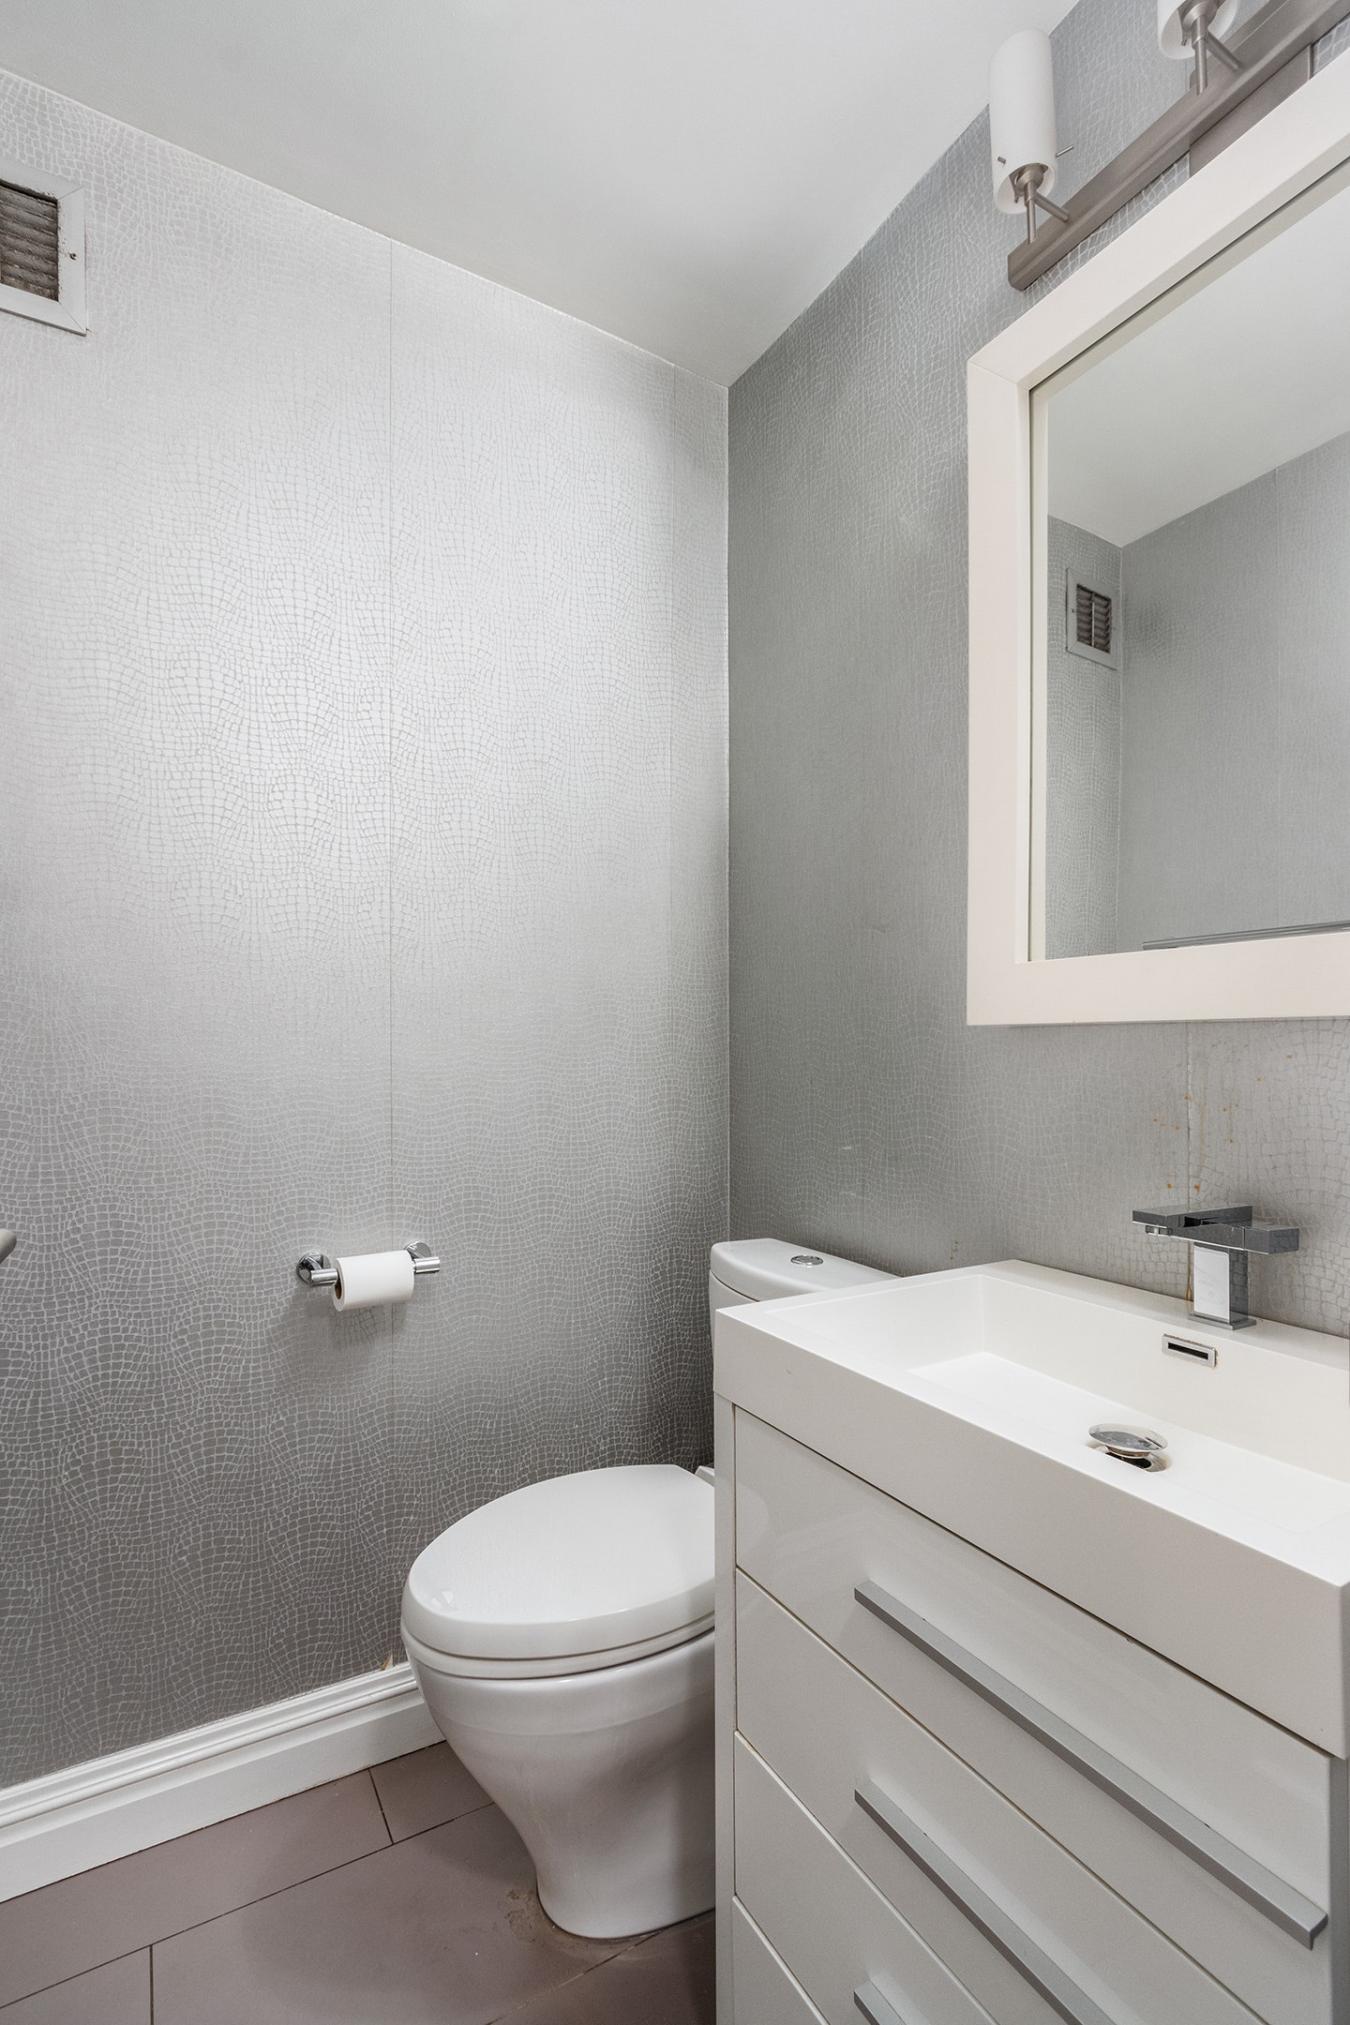 111 EAST 85TH STREET, New York, New York, 10028, United States, 1 Bedroom Bedrooms, ,1 BathroomBathrooms,Residential,For Sale,111 east 85th ST,1468553